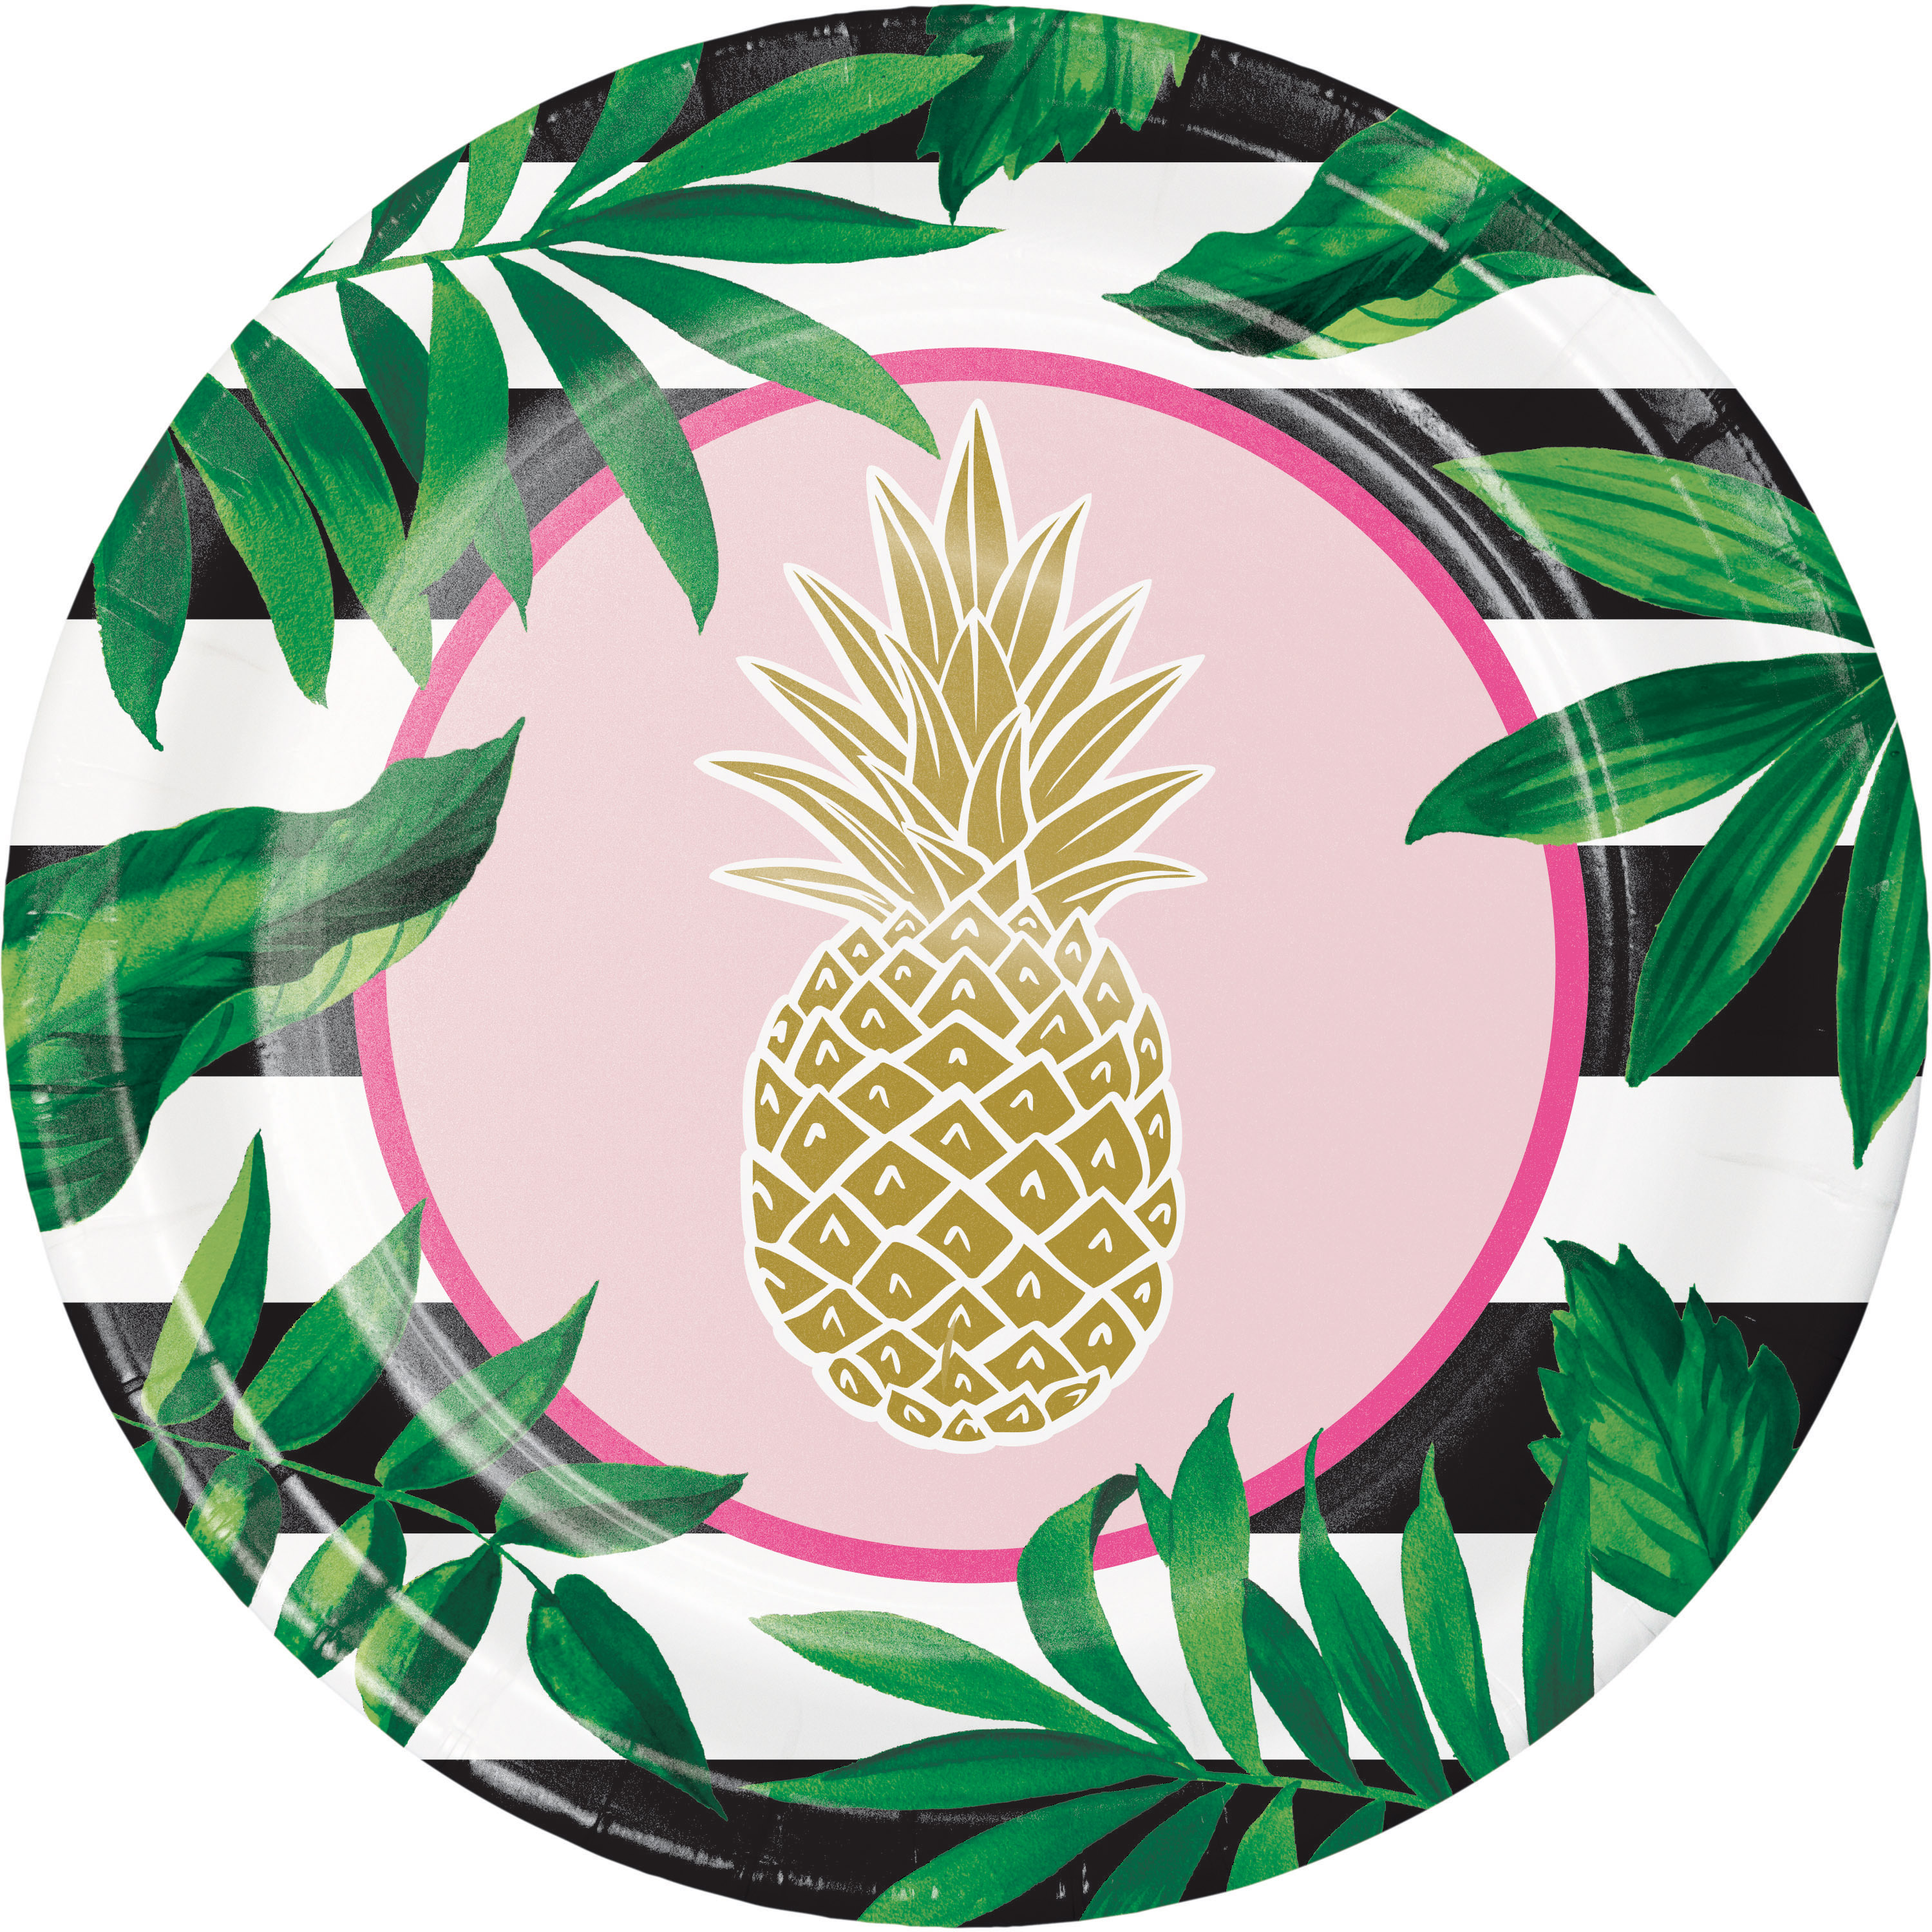 8 "Pinapple and friends" banquet plates, 23 cm, Foil Stamp